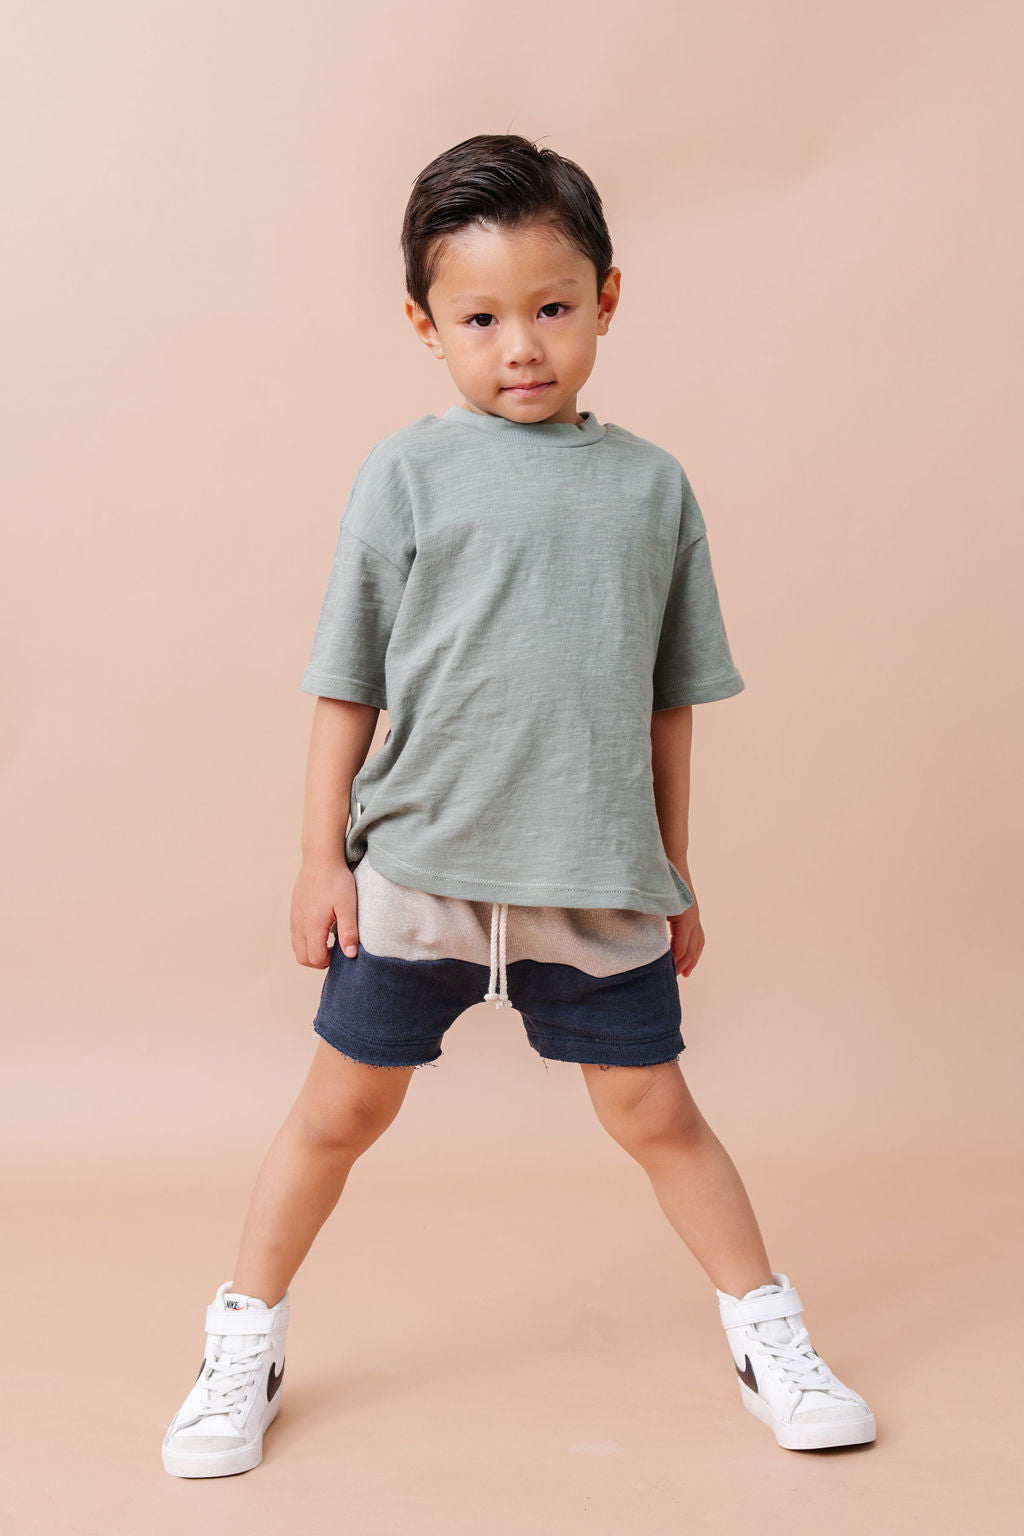 boy shorts - atmosphere heather and collegiate blue